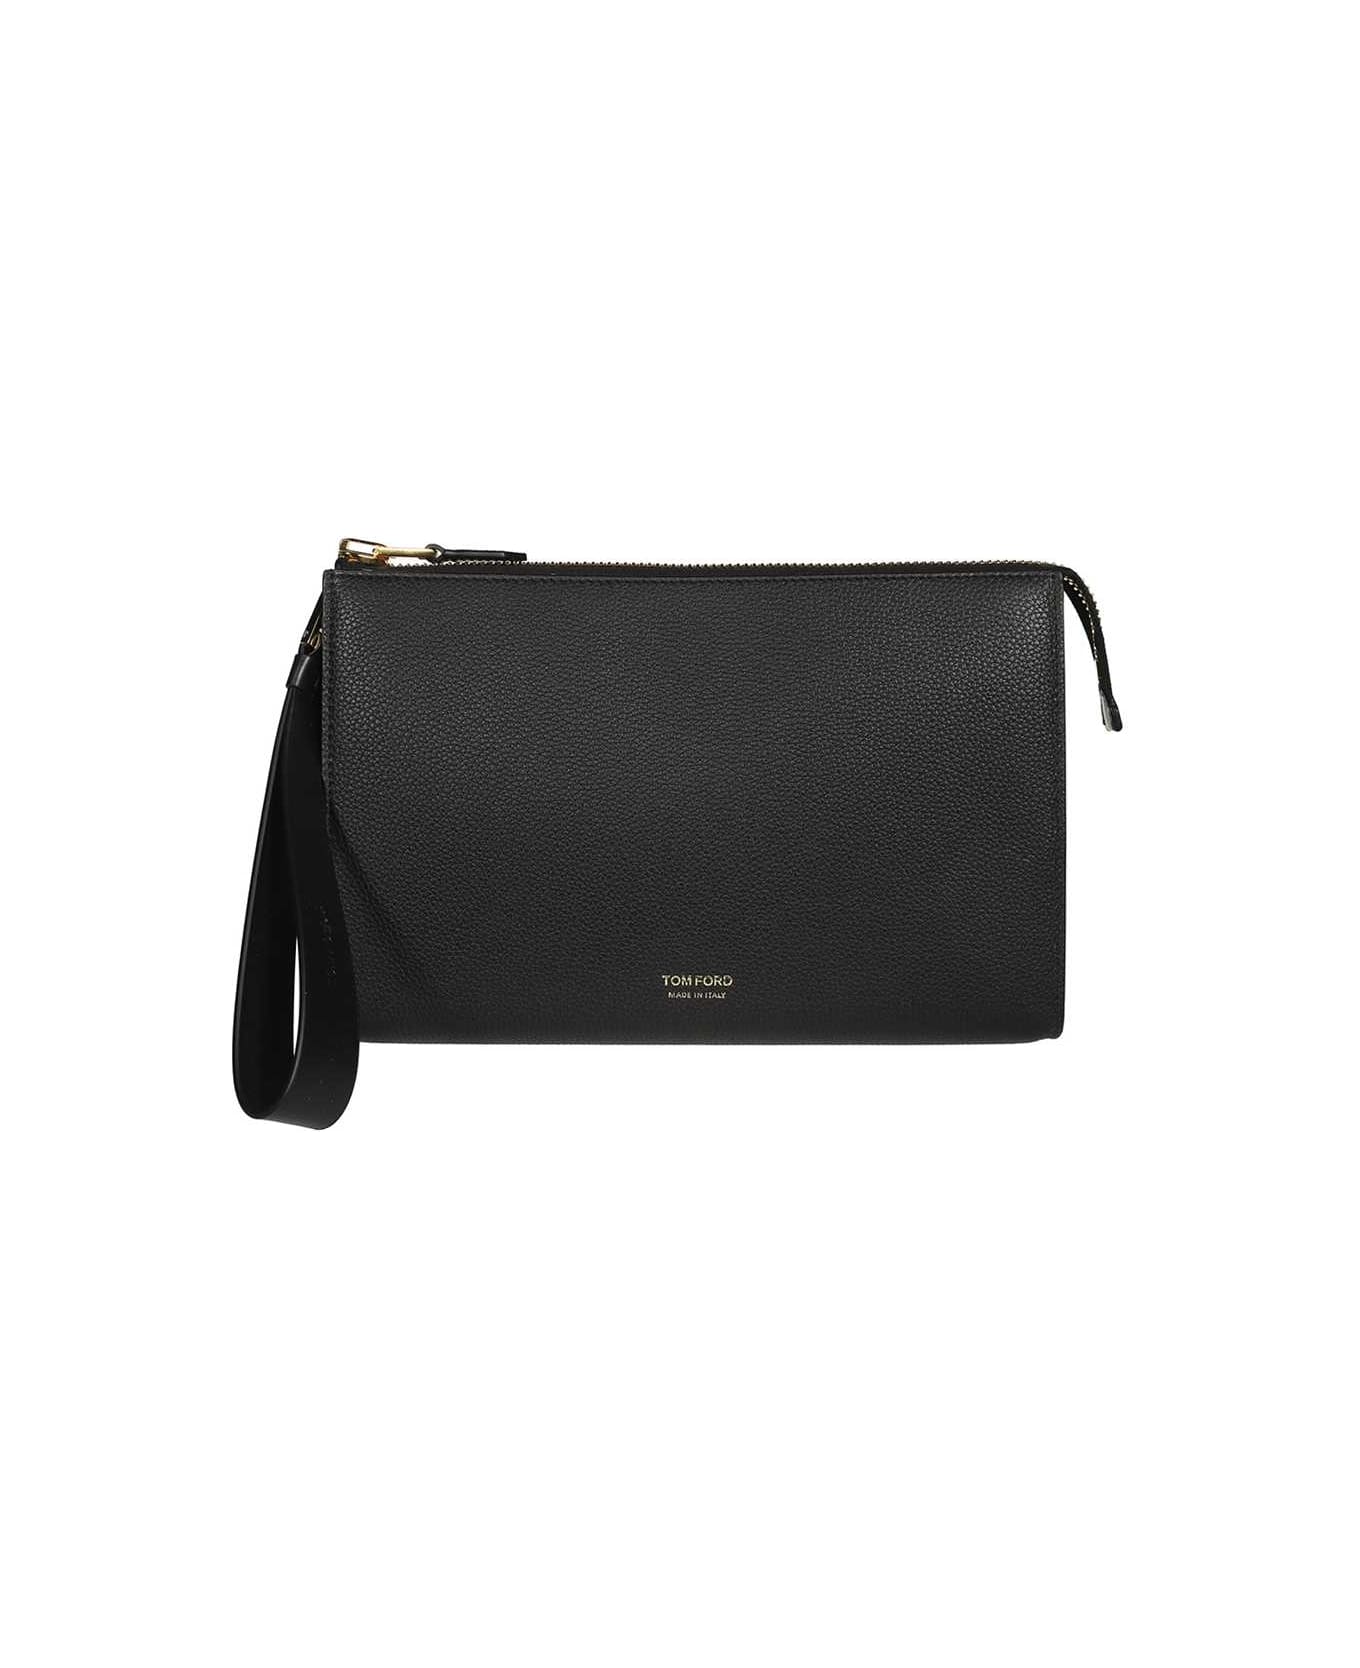 Tom Ford Leather Flat Pouch - black